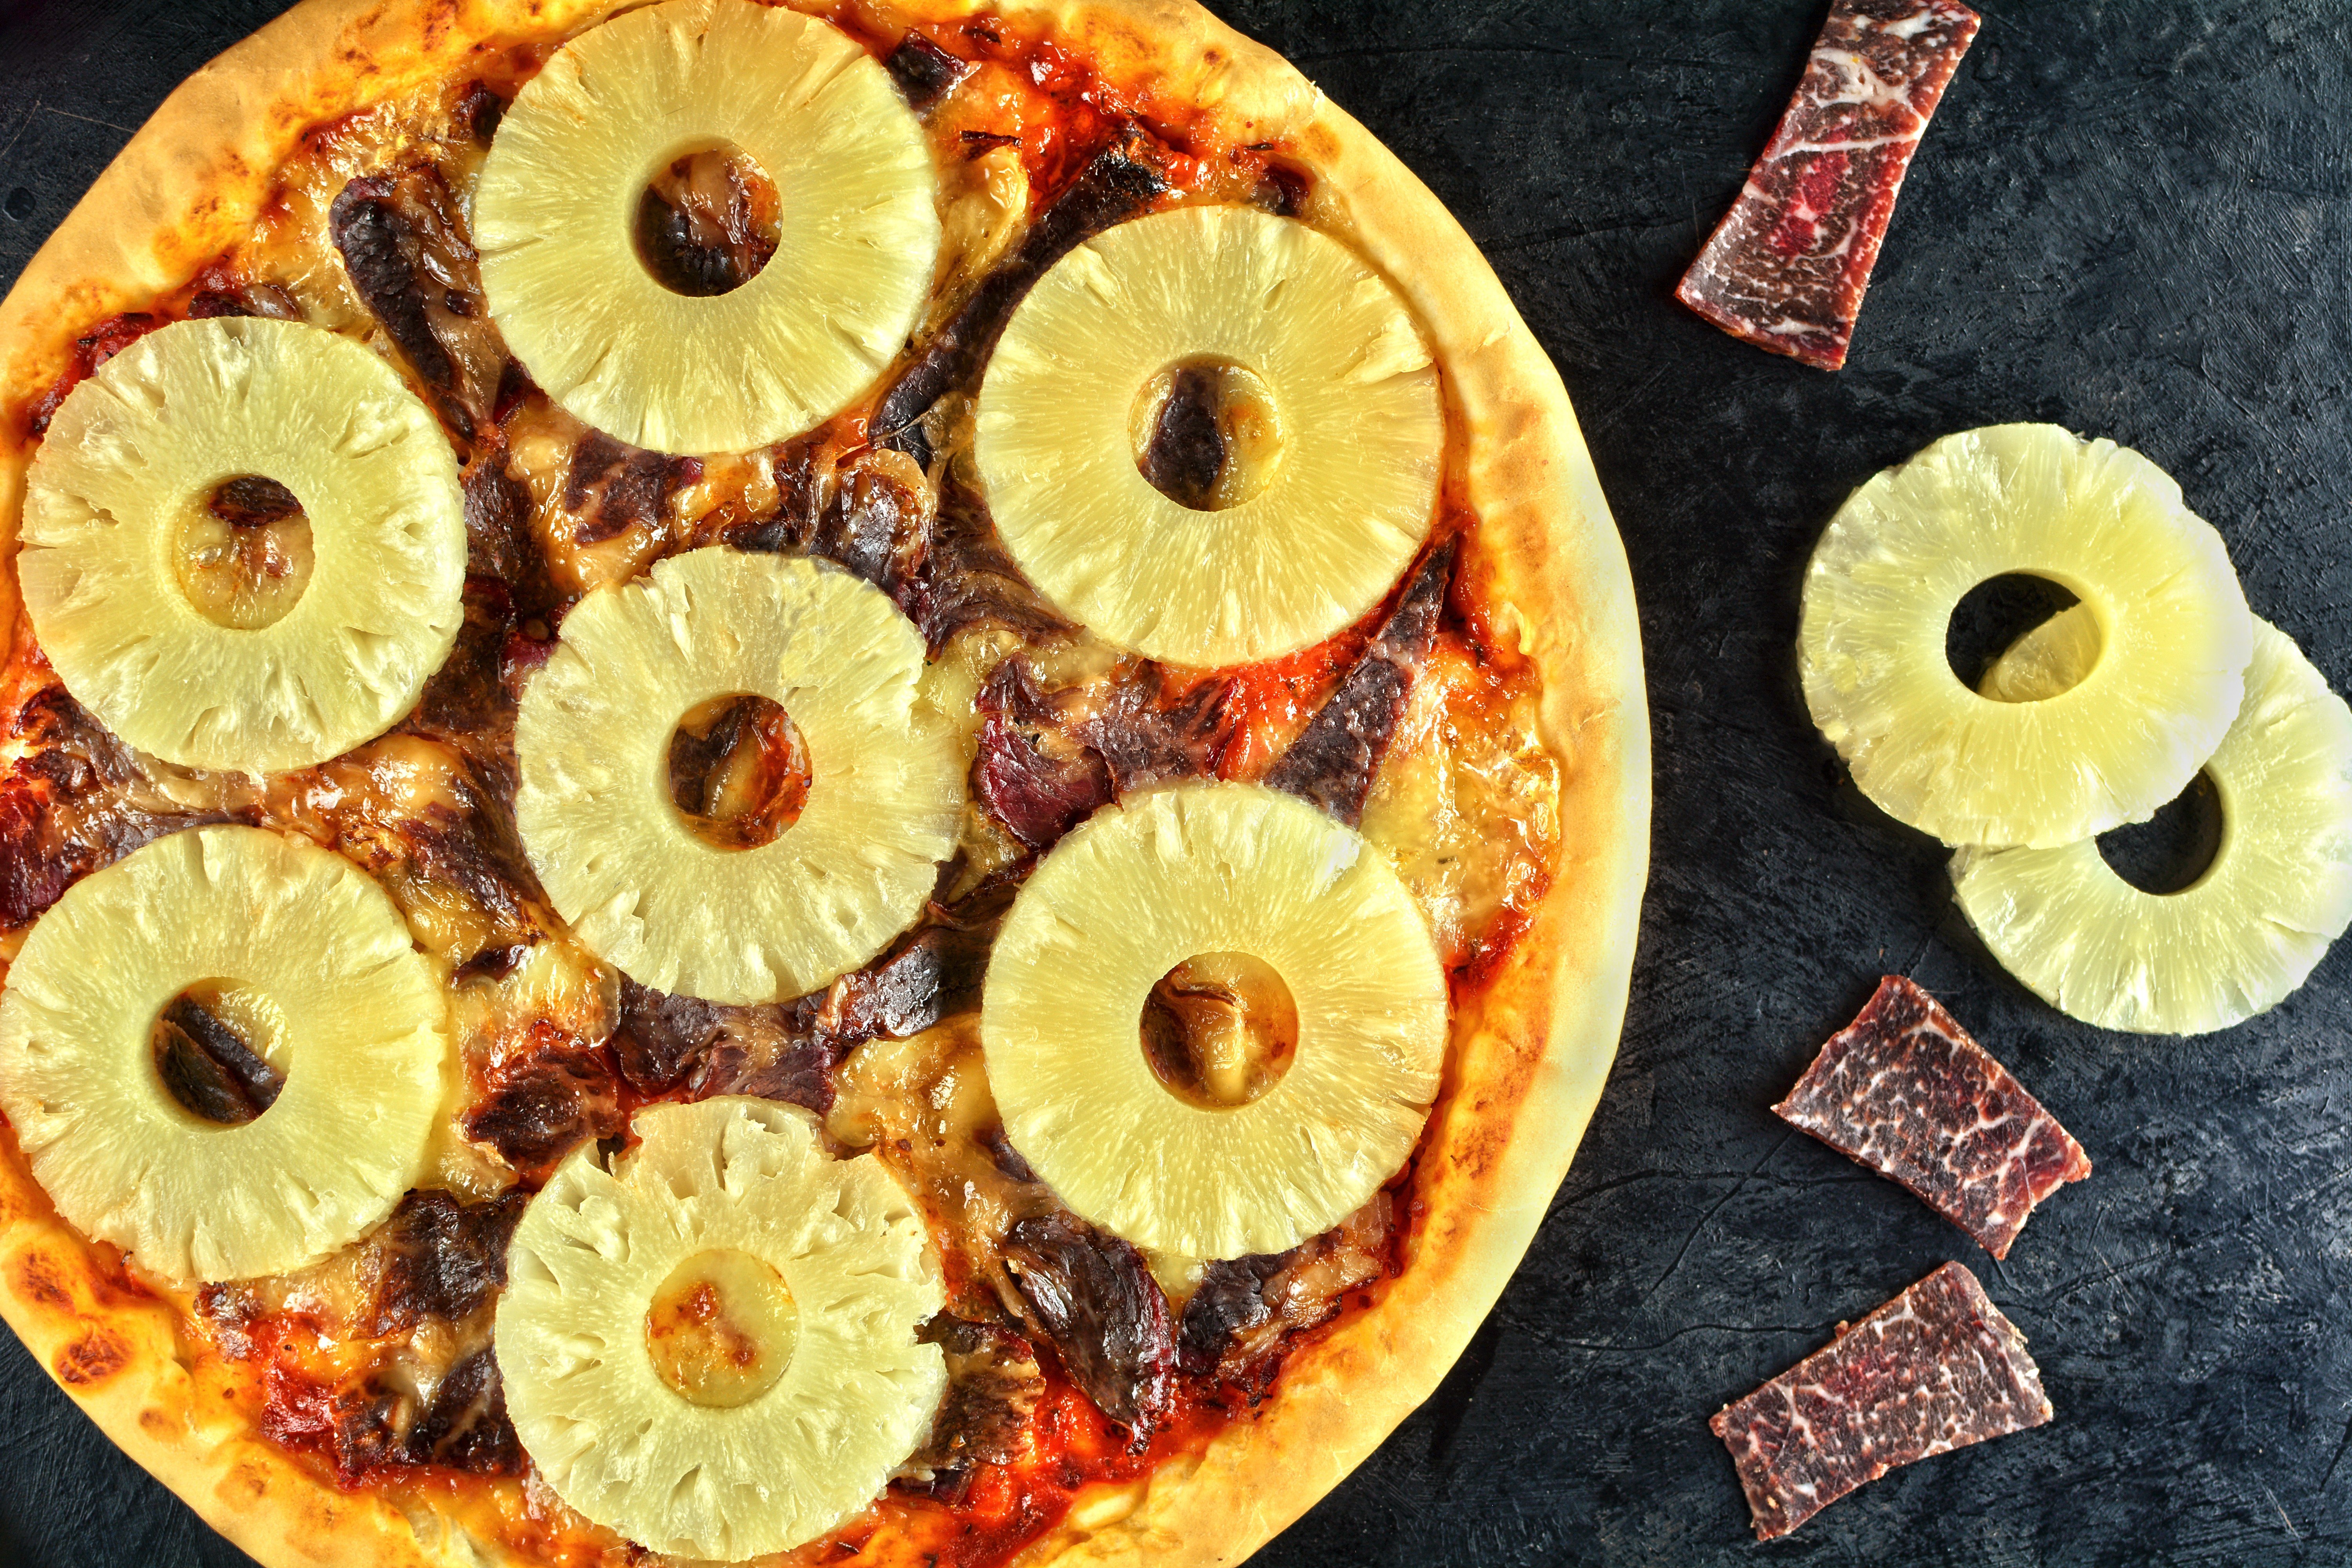 Not everyone loves pineapple on pizza, especially when it looks like this. Photo: Shutterstock